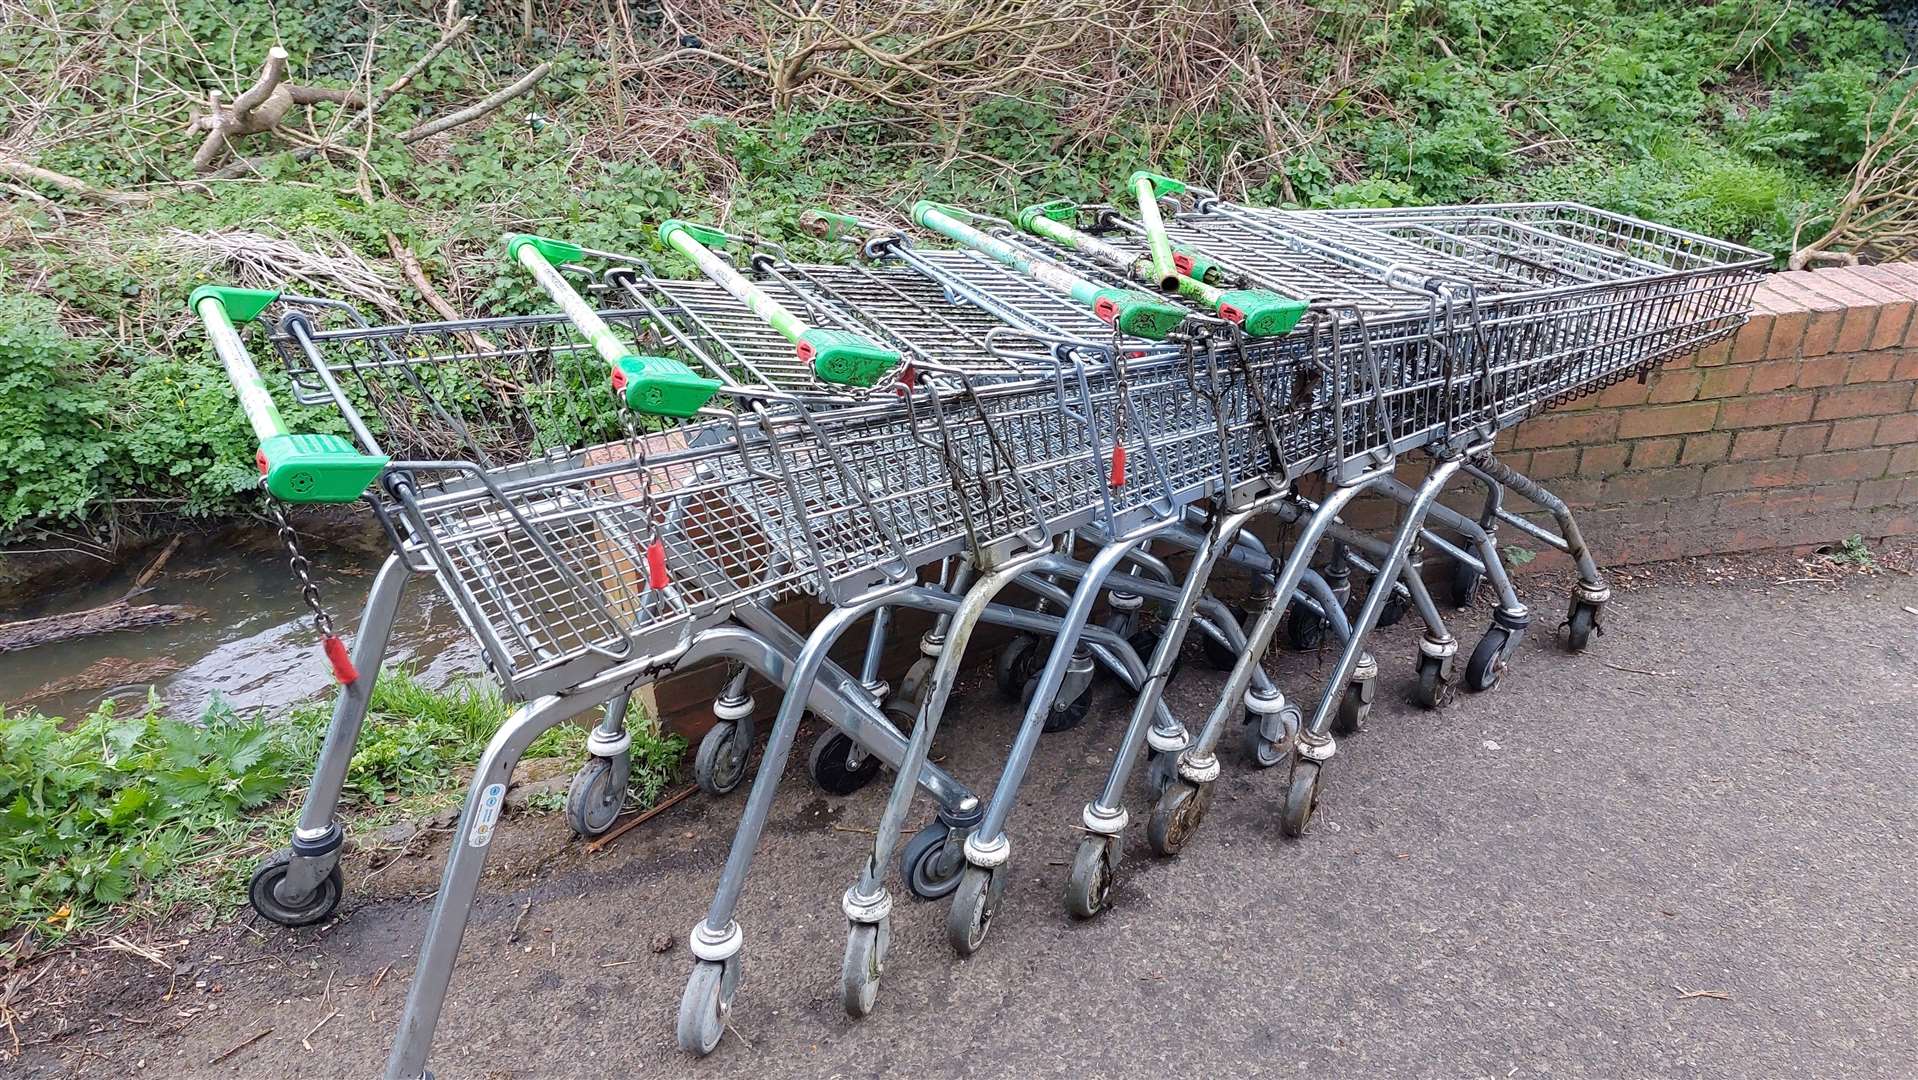 On their latest walk, they hauled out seven trollies